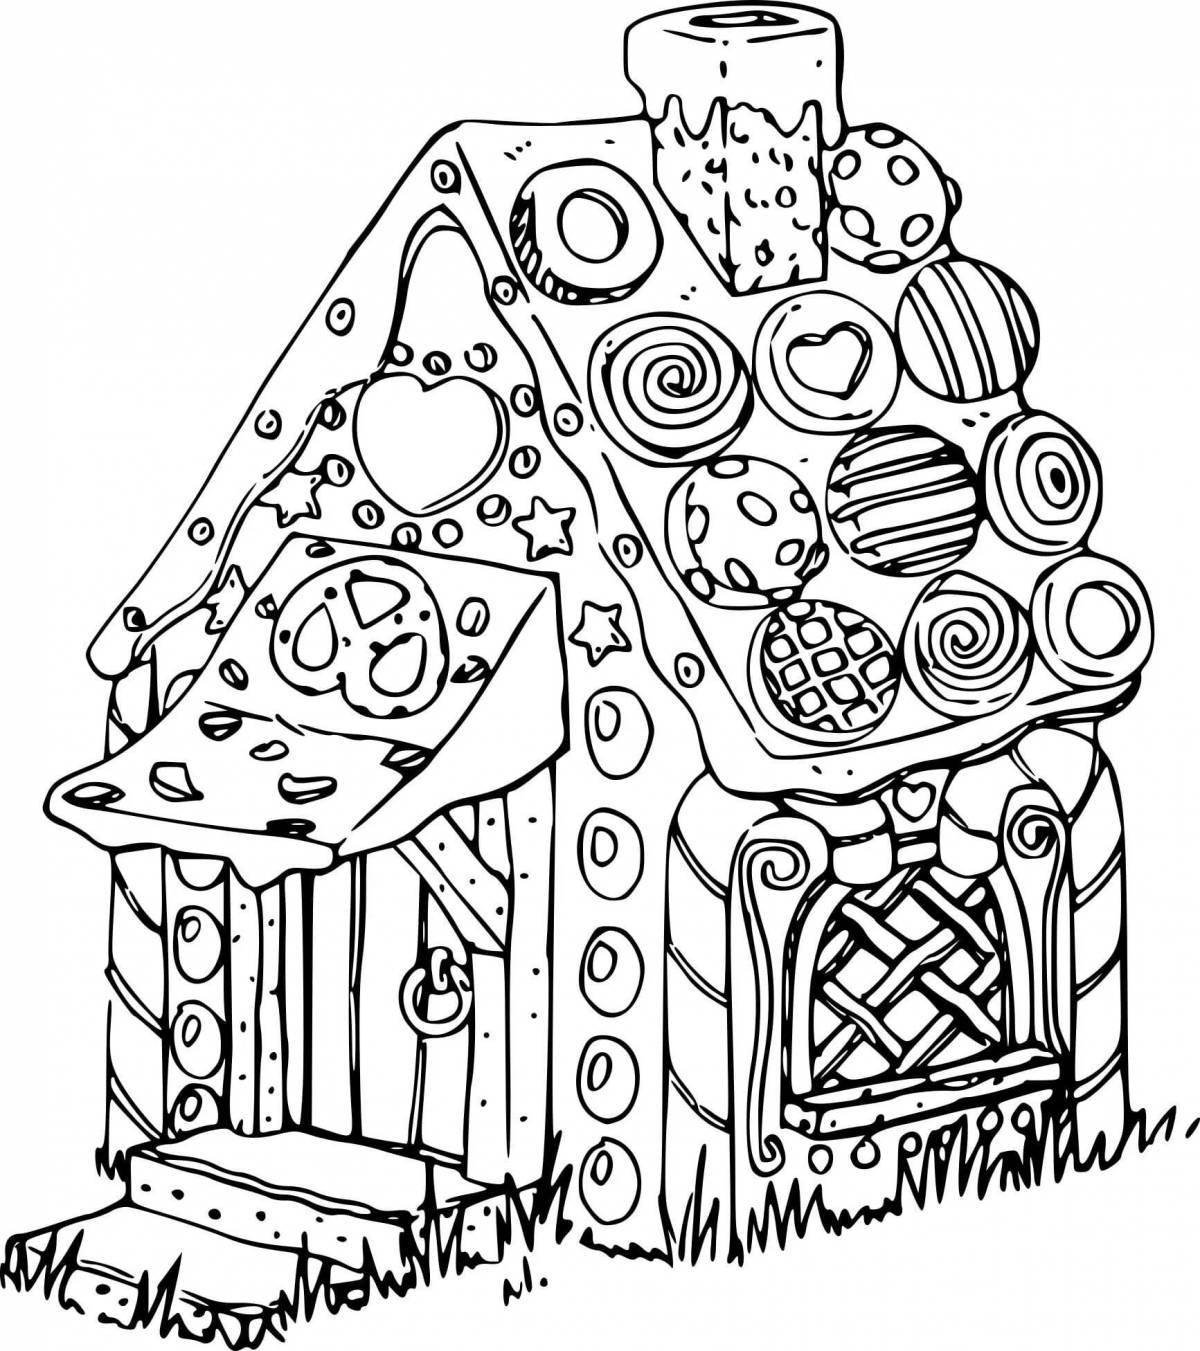 Coloring page nice sweet home